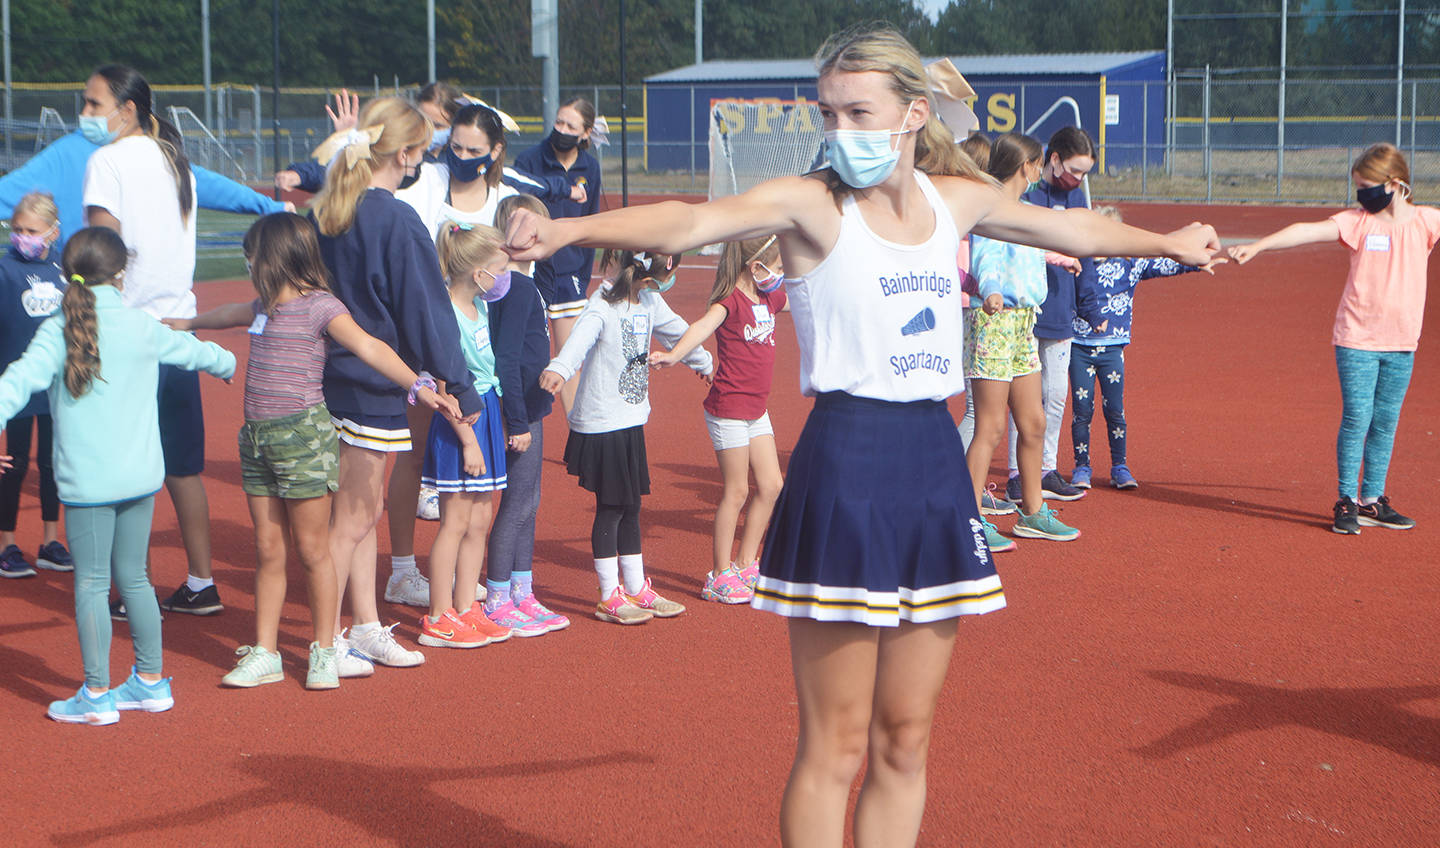 Bainbridge High School cheerleader Addy Ledbetter shows the youngsters the “T” formation.